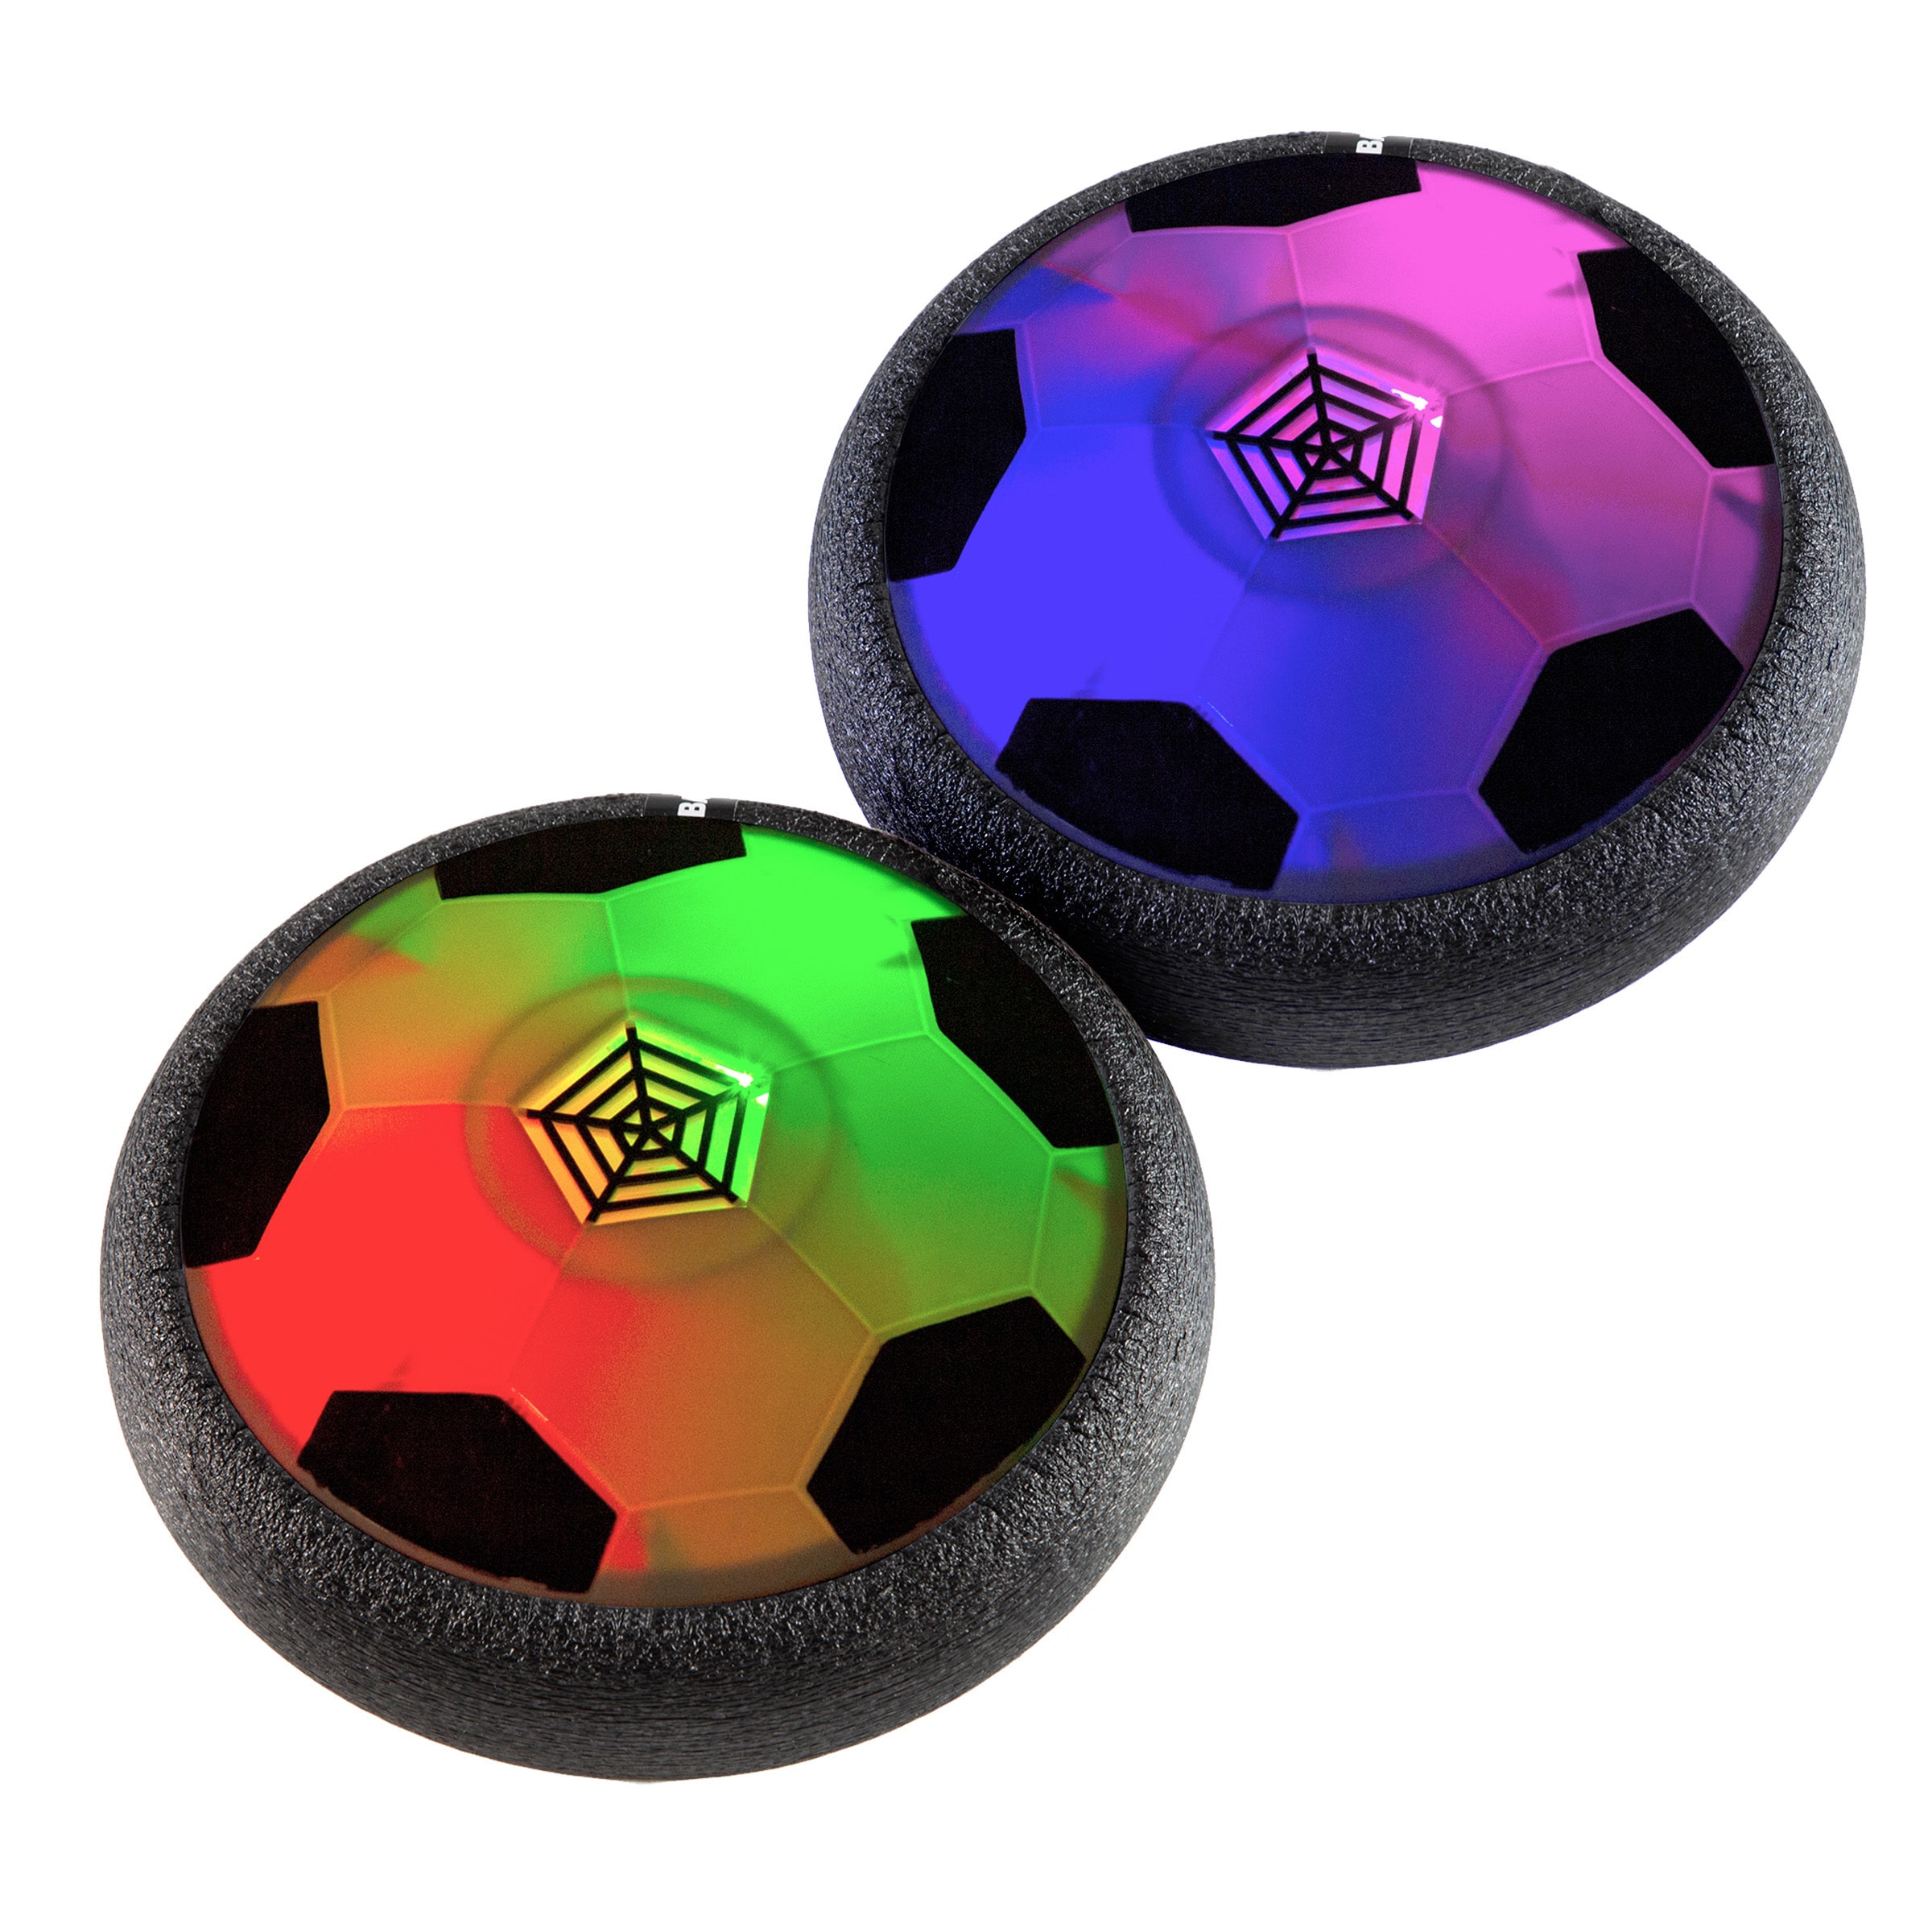 Toy Time Hover Soccer Ball 2-Pack - Air Soccer Balls with LED Lights and  Soft Bumpers - Fun Toys for Kids, Indoor Exercise, Glides on Hard Surfaces  in the Kids Play Toys department at